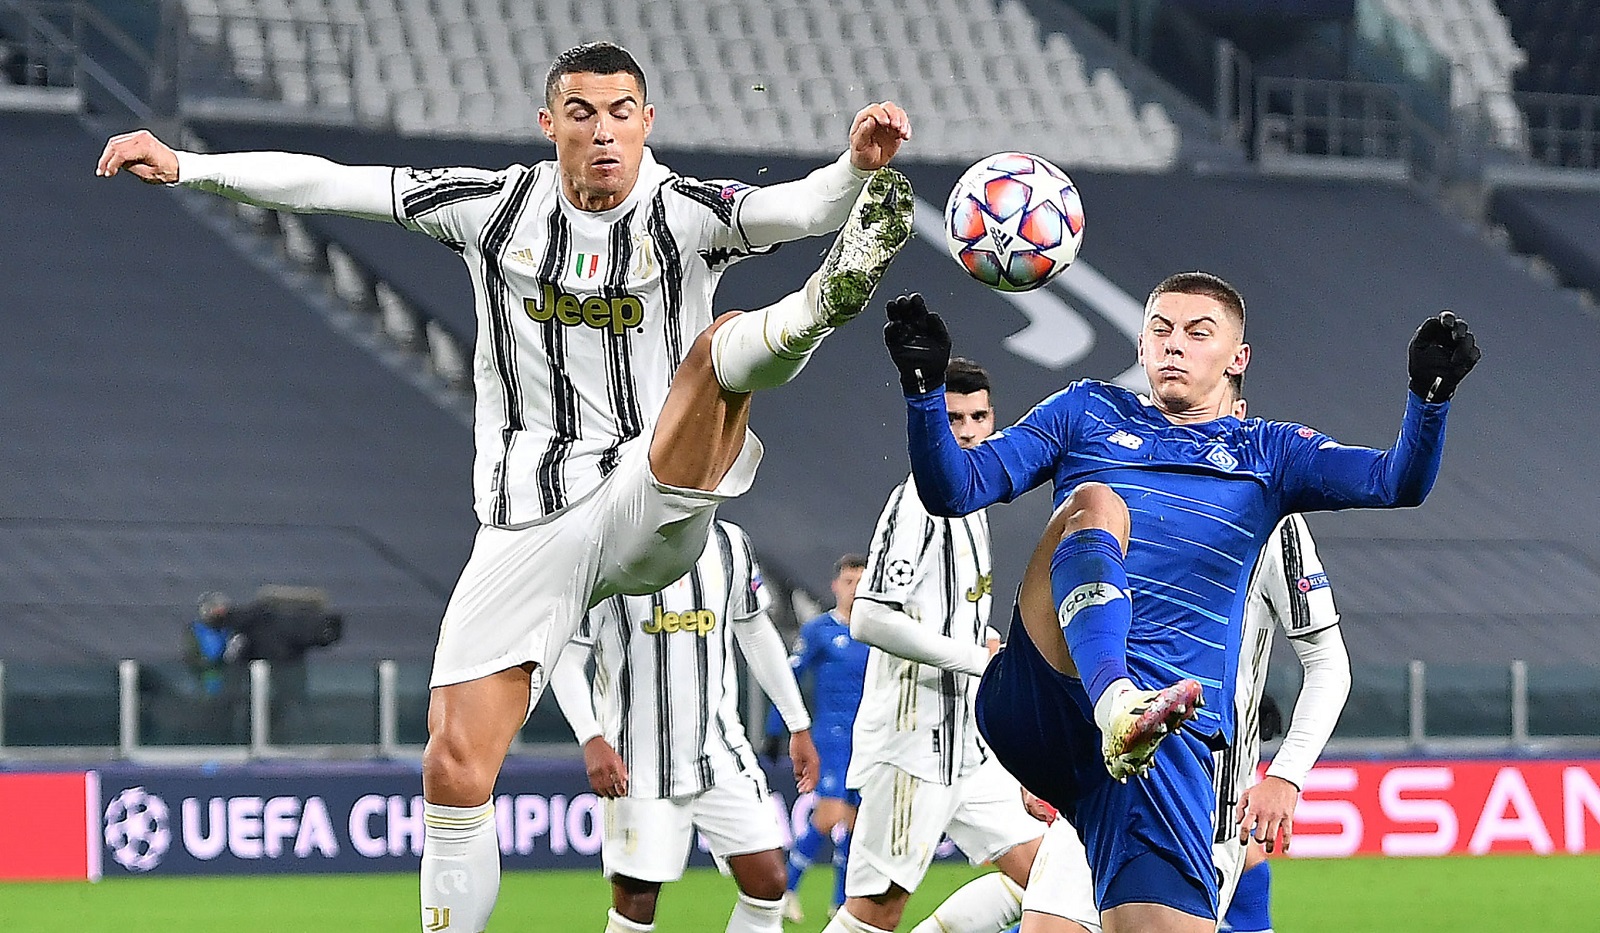 epa08858028 Juventus’ Cristiano Ronaldo(L) in action during the UEFA Champions League Group G soccer match between Juventus FC vs FK Dynamo Kyiv at the Allianz Stadium in Turin, Italy, 2 December 2020.  EPA/ALESSANDRO DI MARCO